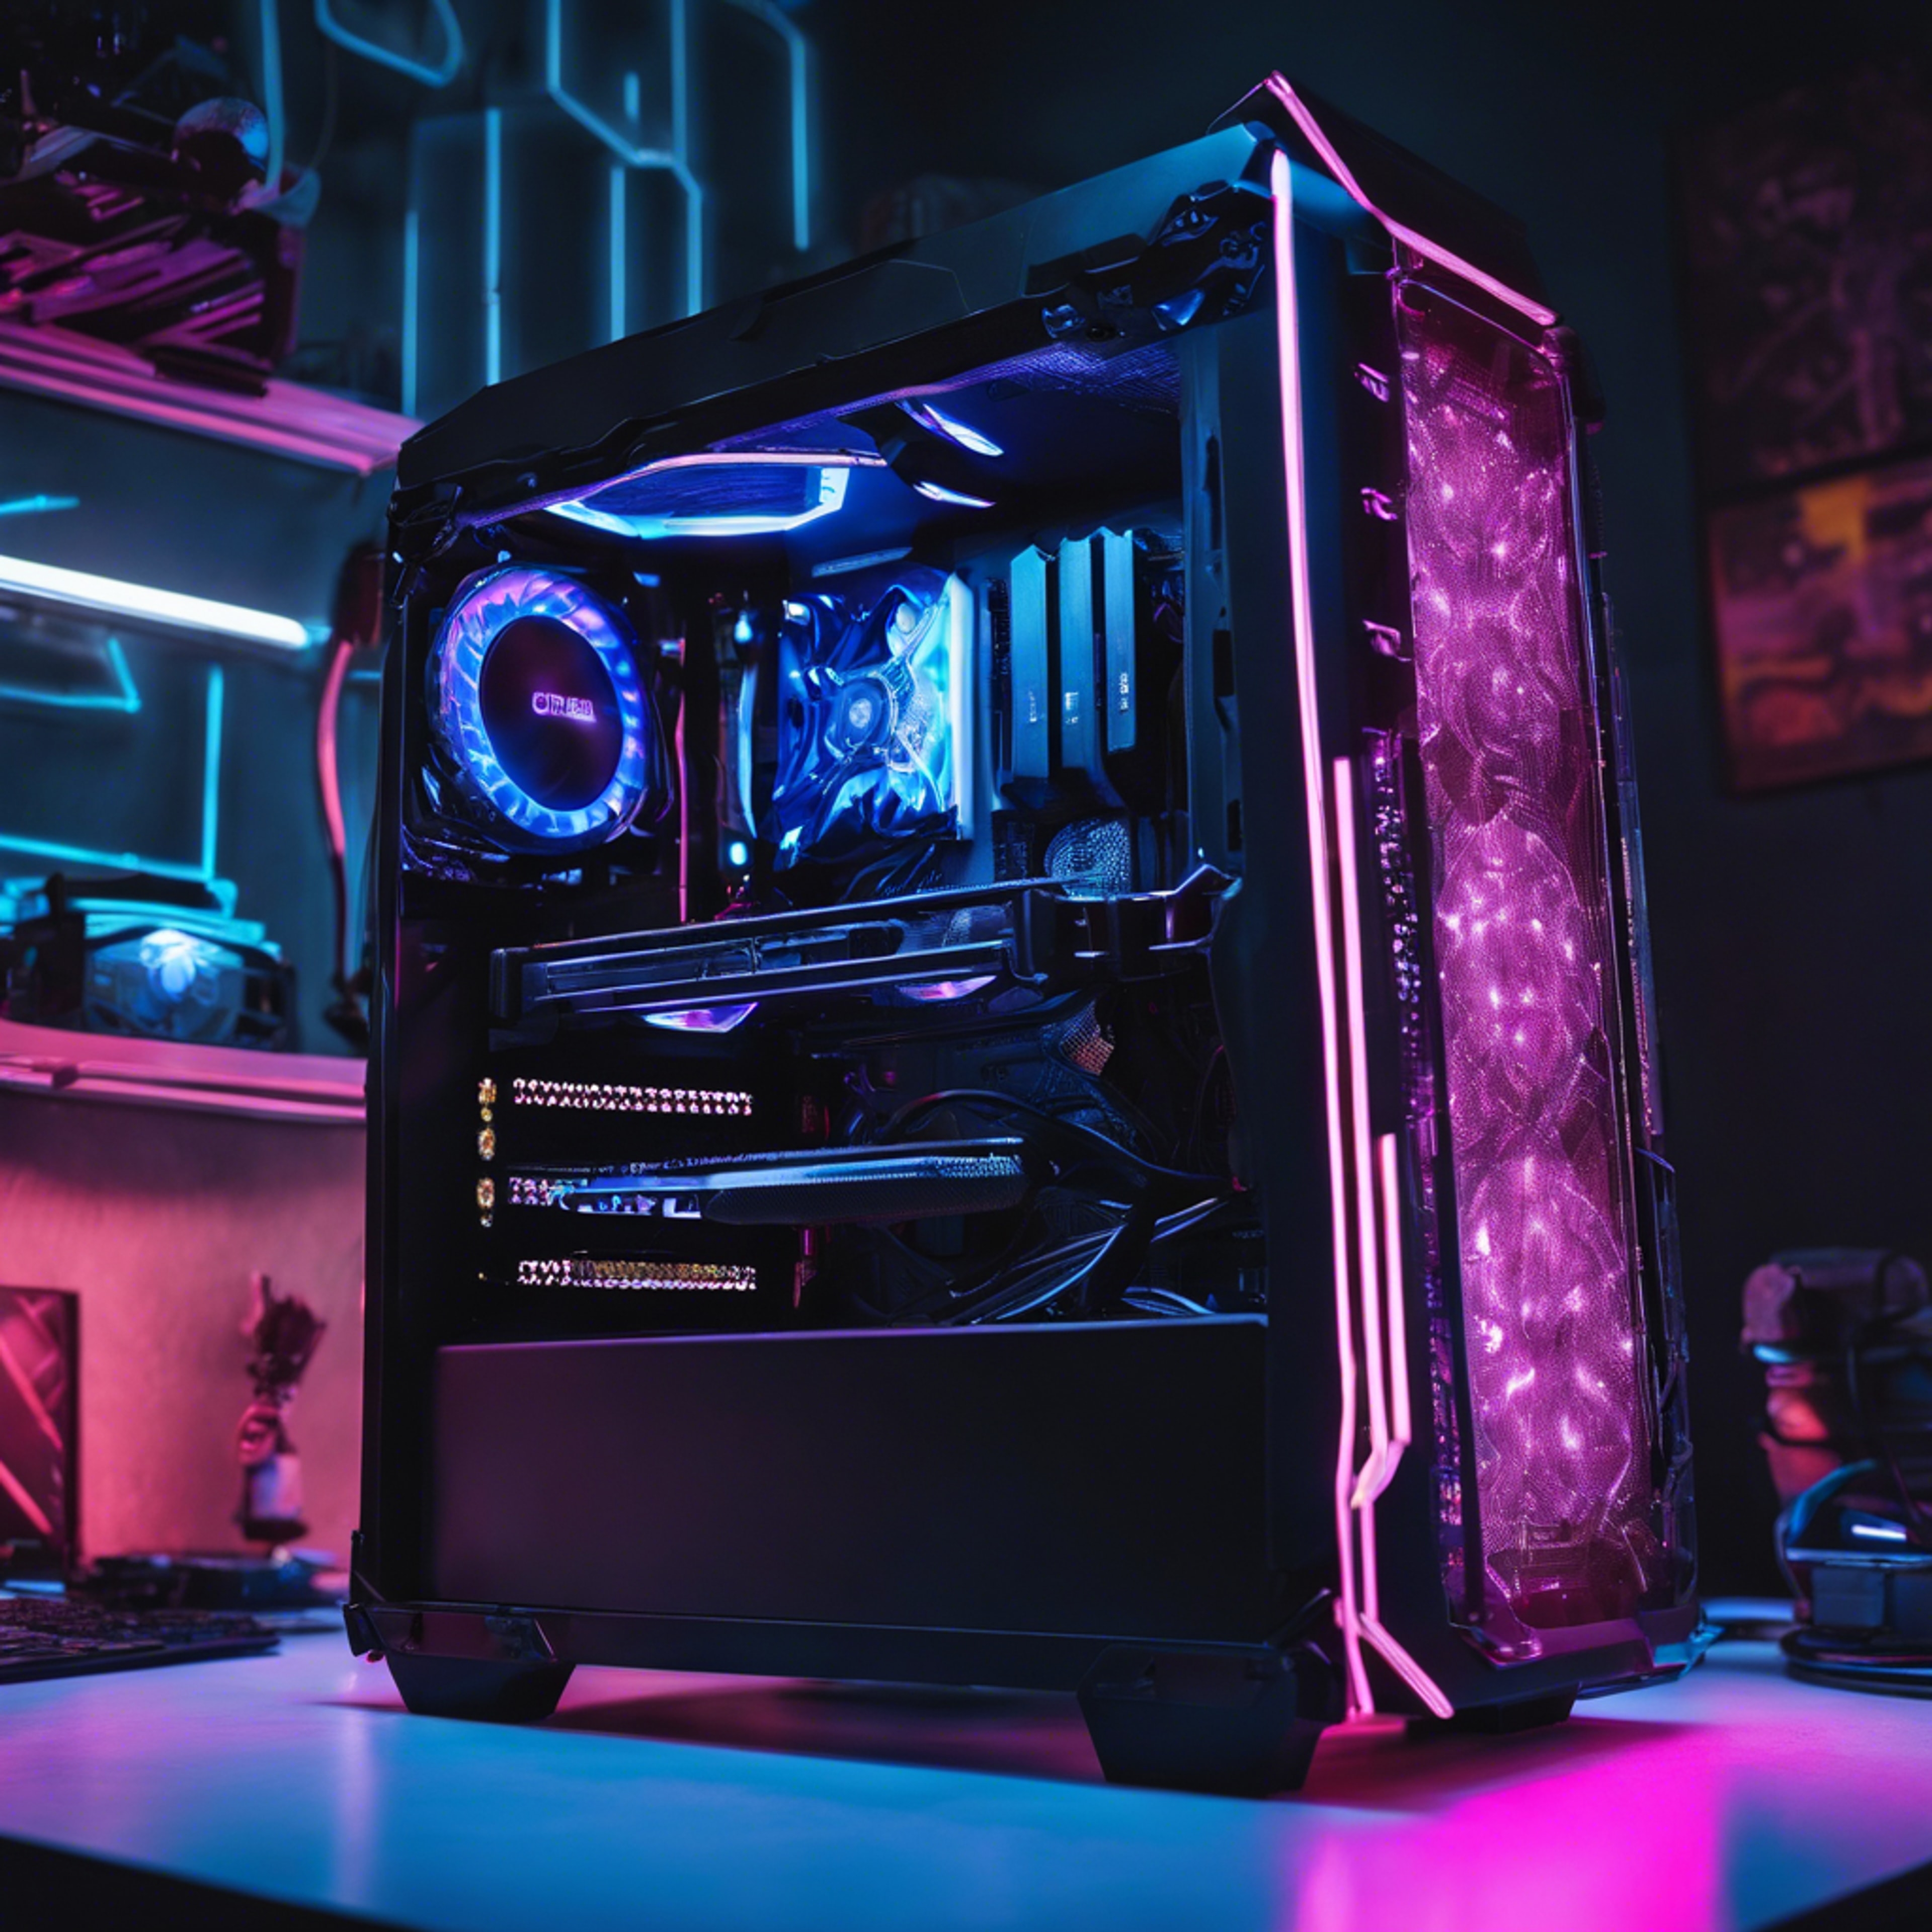 A cyberpunk-style black gaming PC with neon blue LED lights. Tapeta[4f1d7ee7161d4e2894f4]